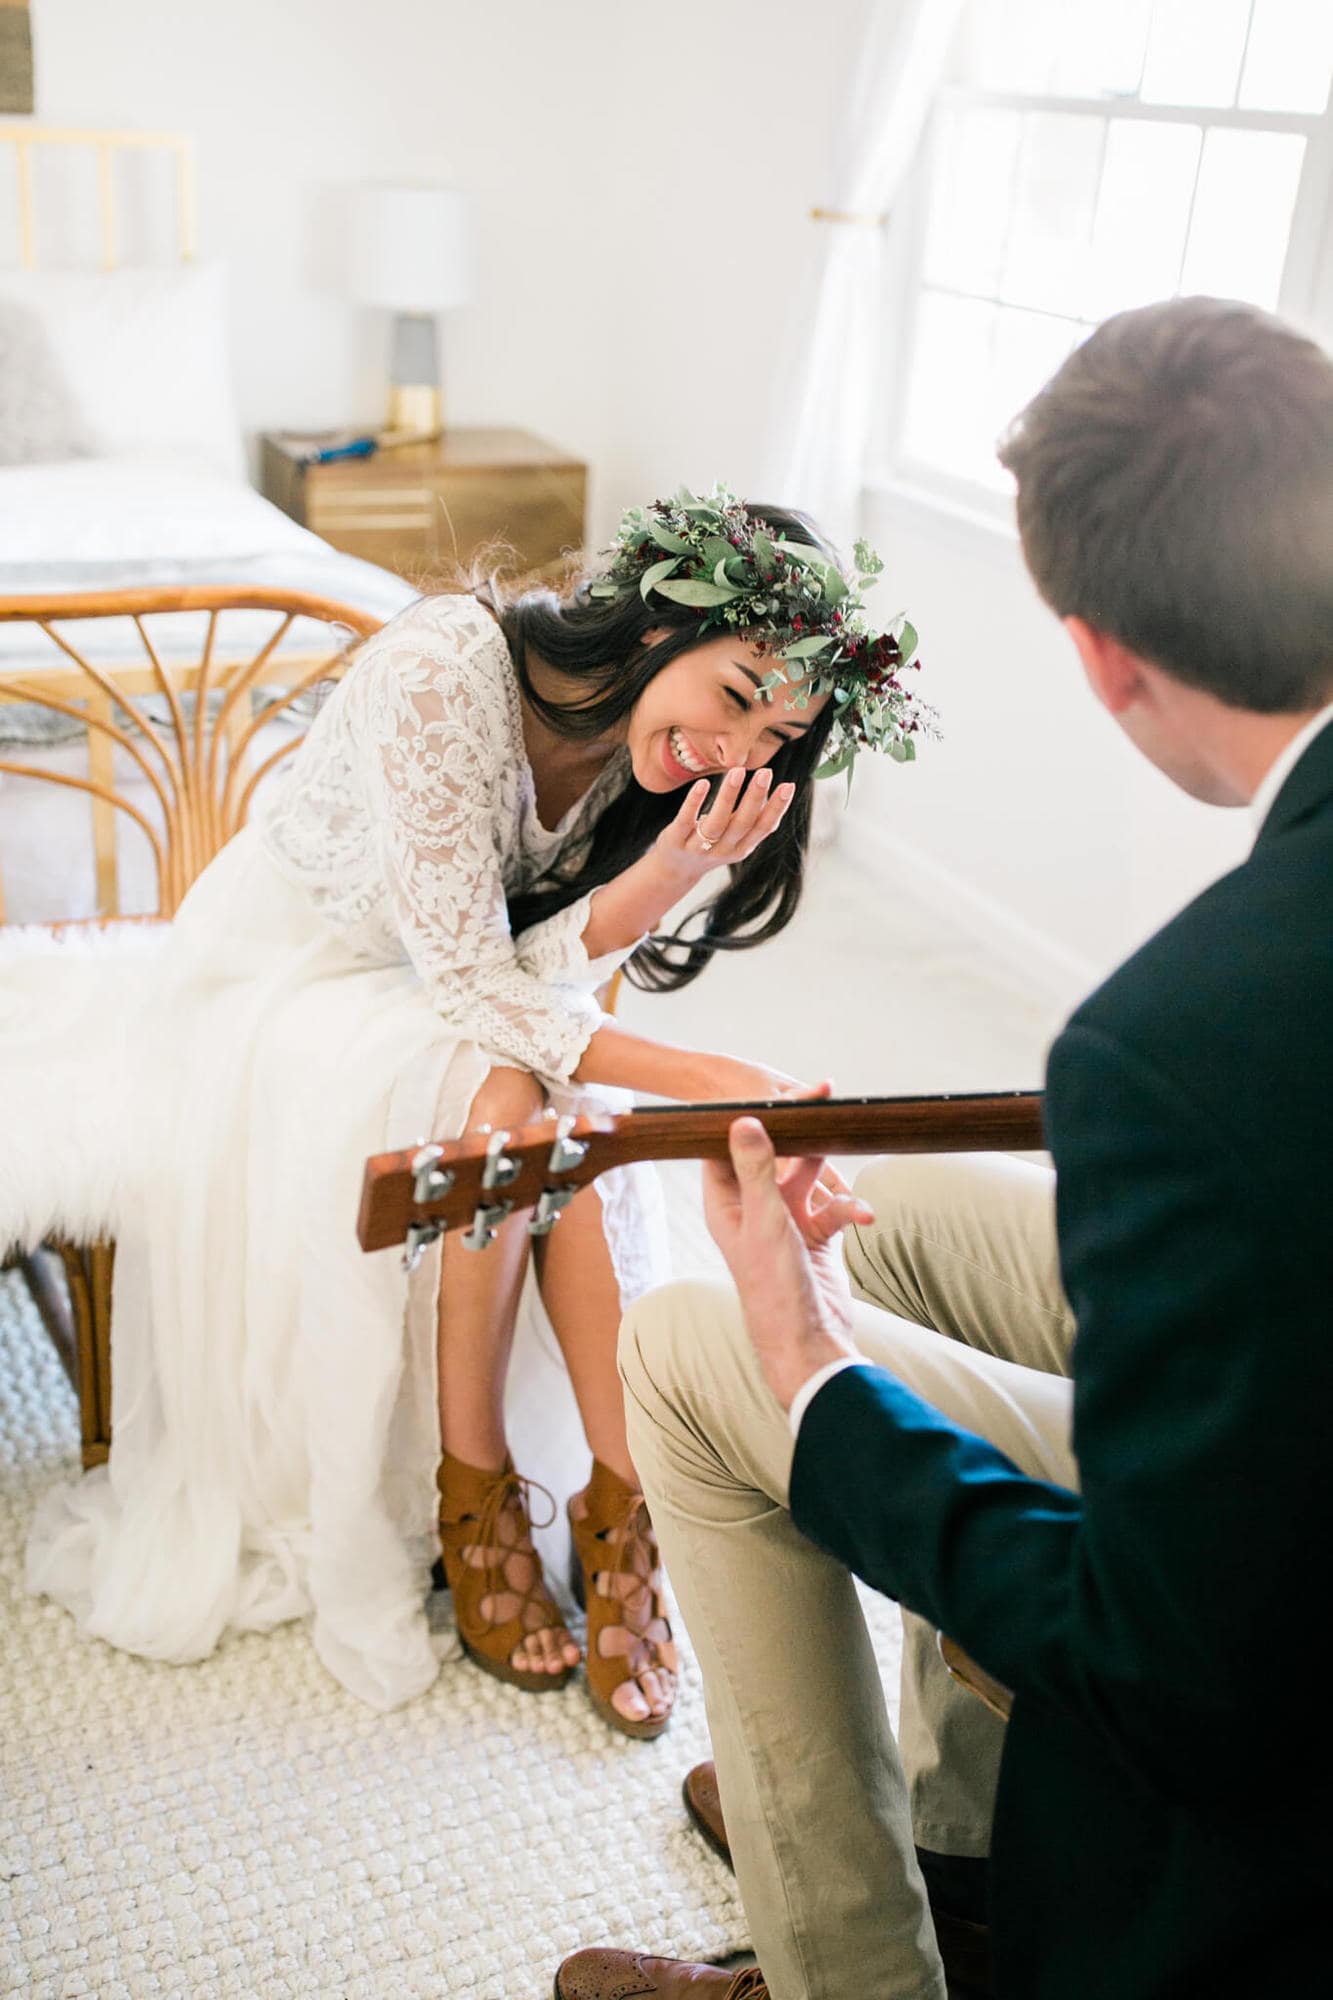 As her groom plays guitar, the bride giggles.